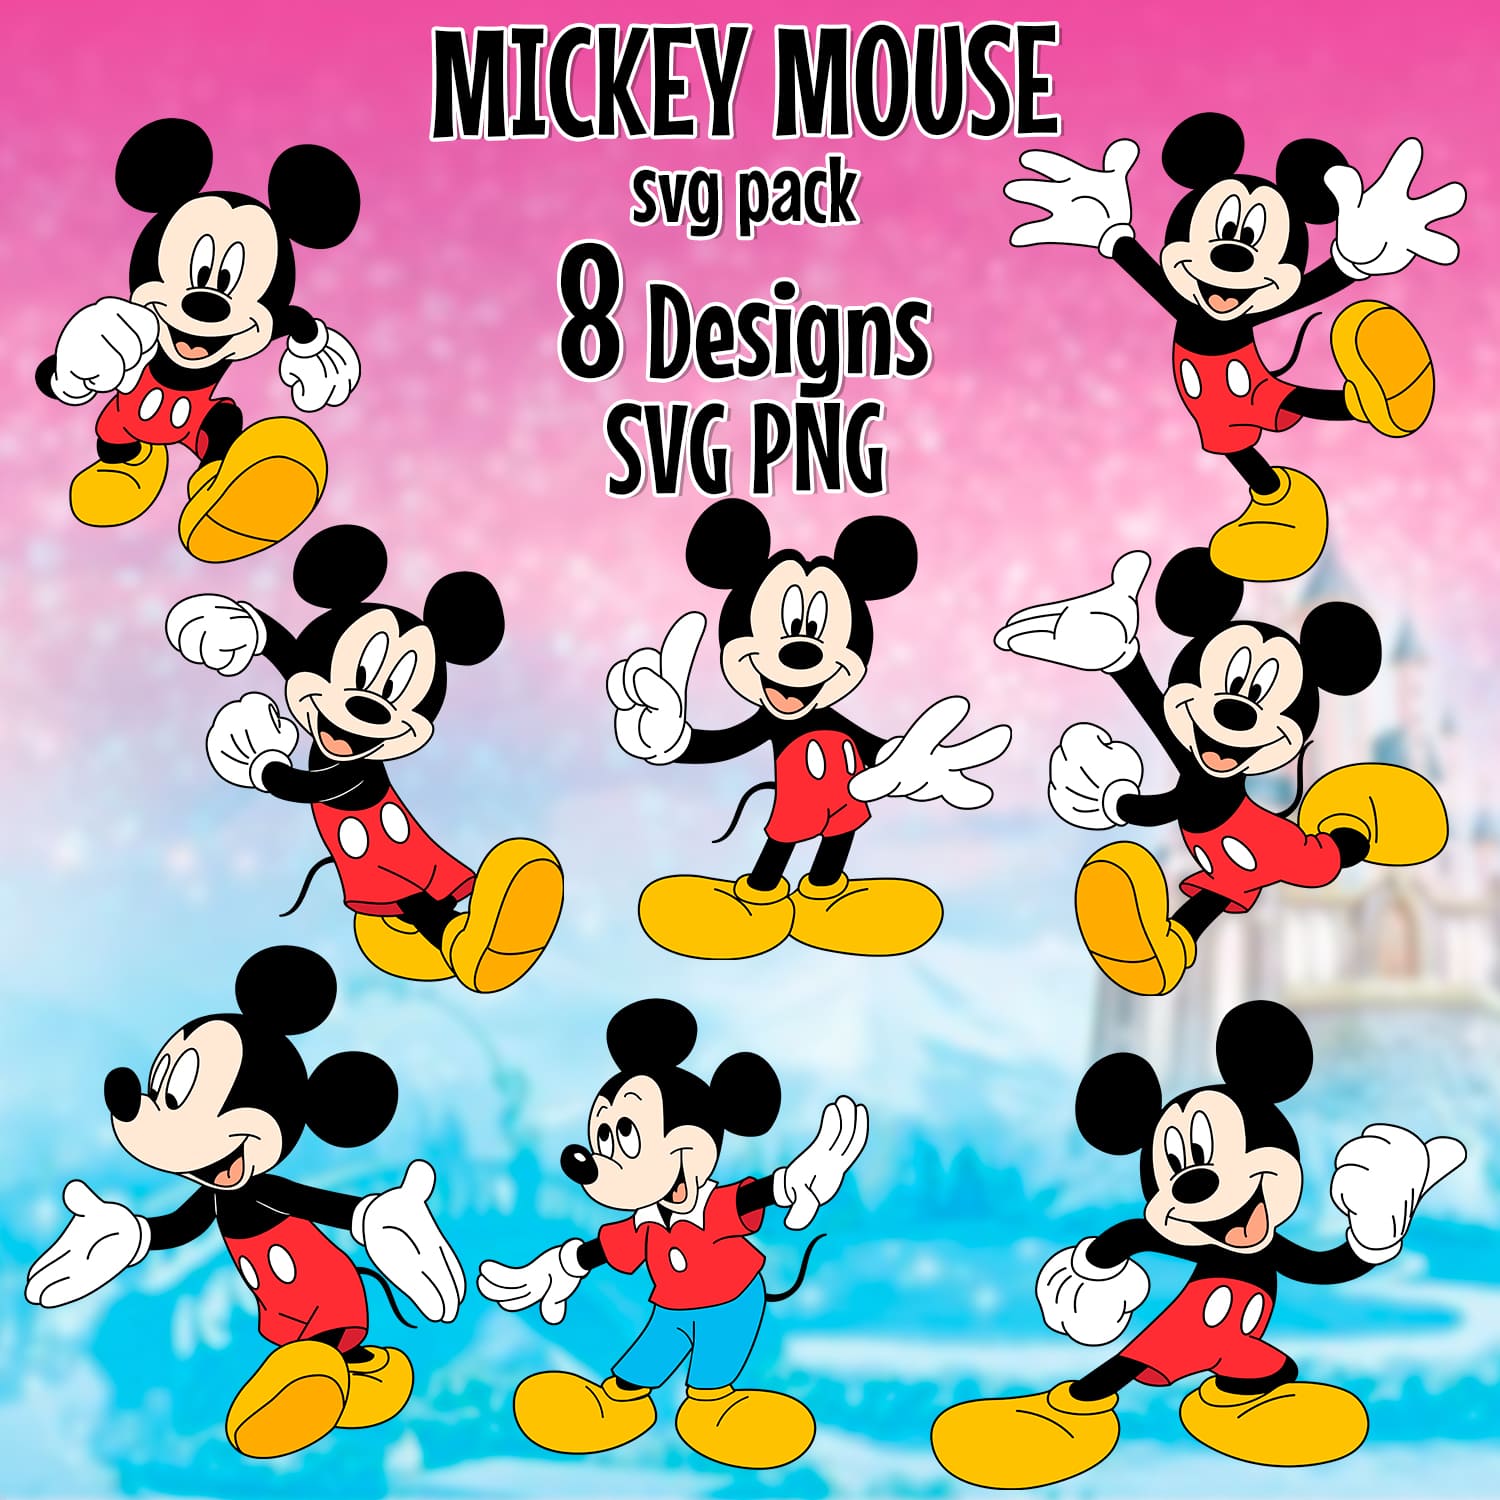 Mickey Mouse SVG - main image preview.